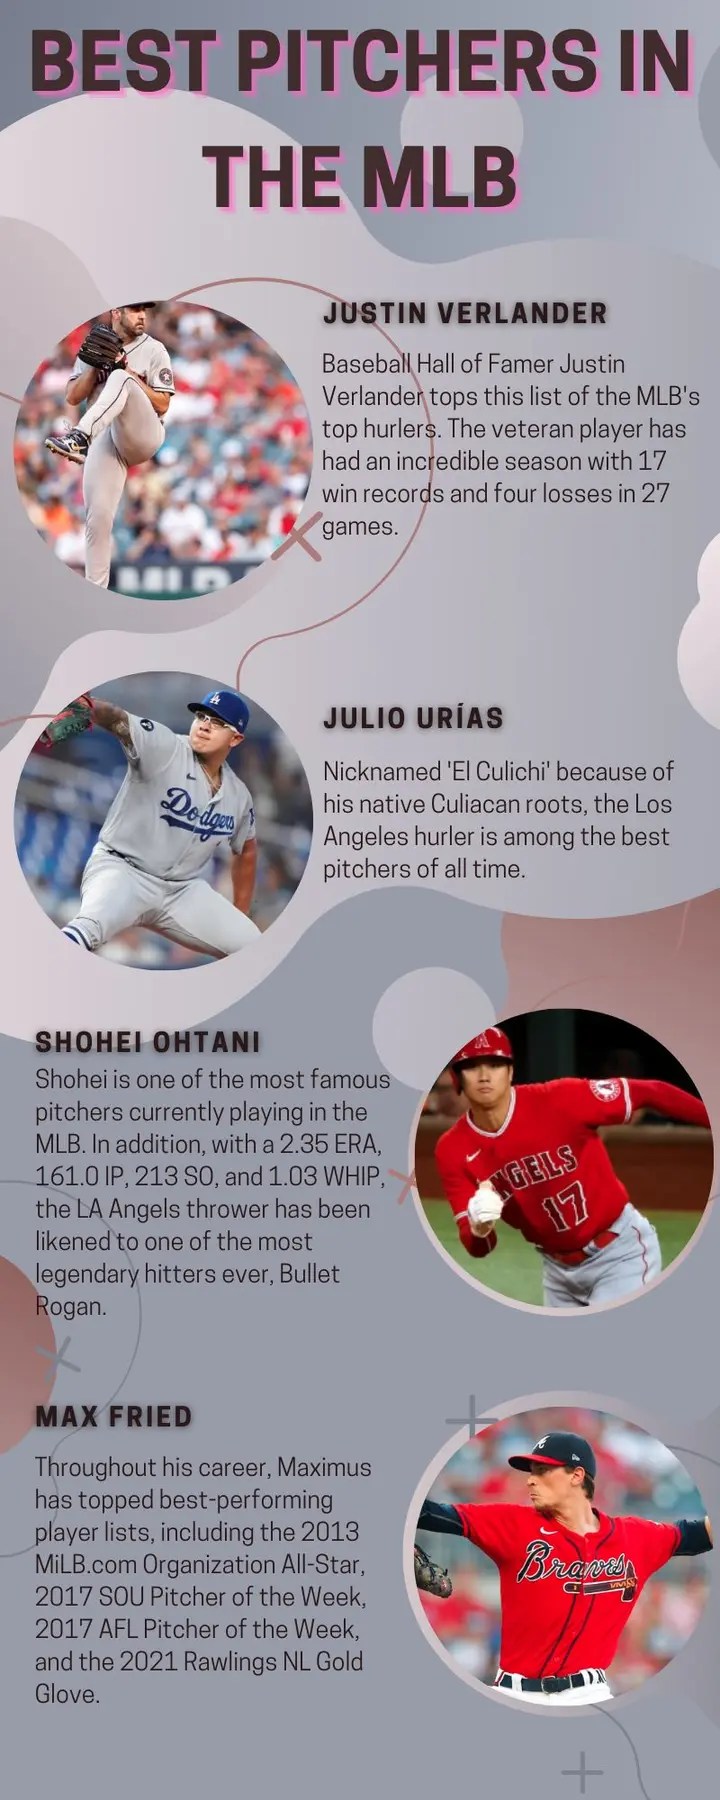 best pitchers in the MLB